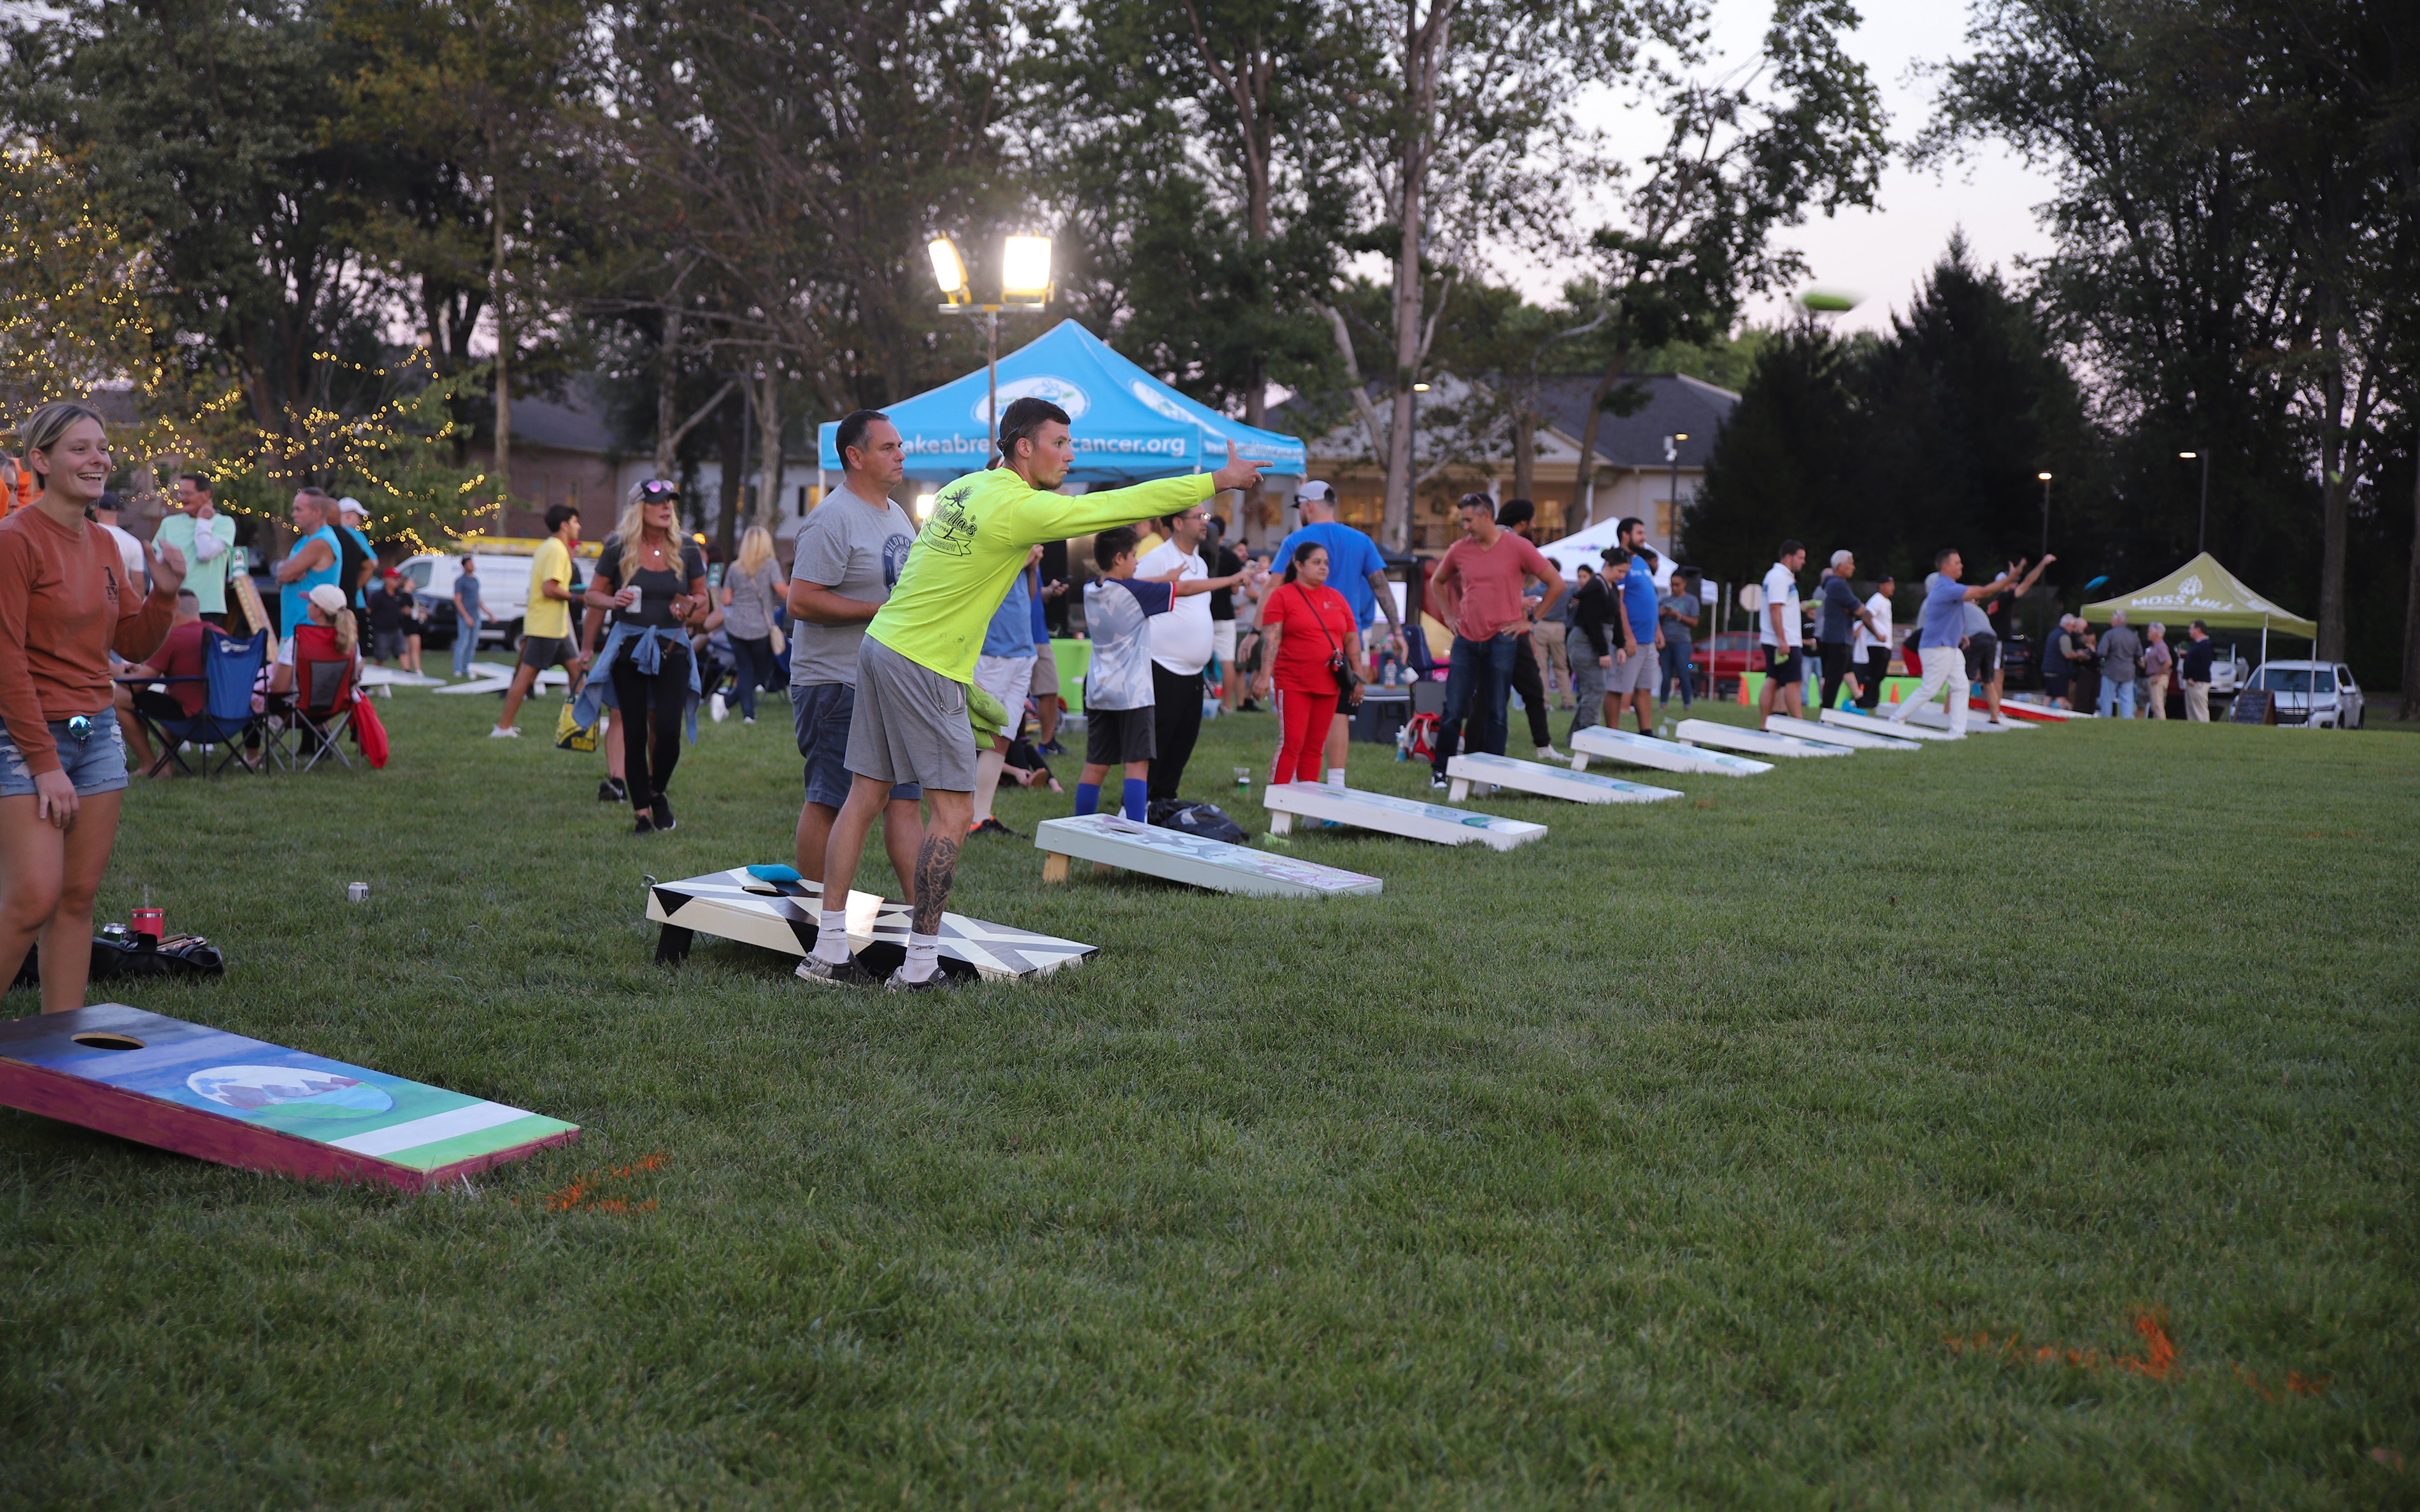 Cornhole players stand by line of cornhole boards to play in the second annual Kids-N-Hope Cornhole Tournament.